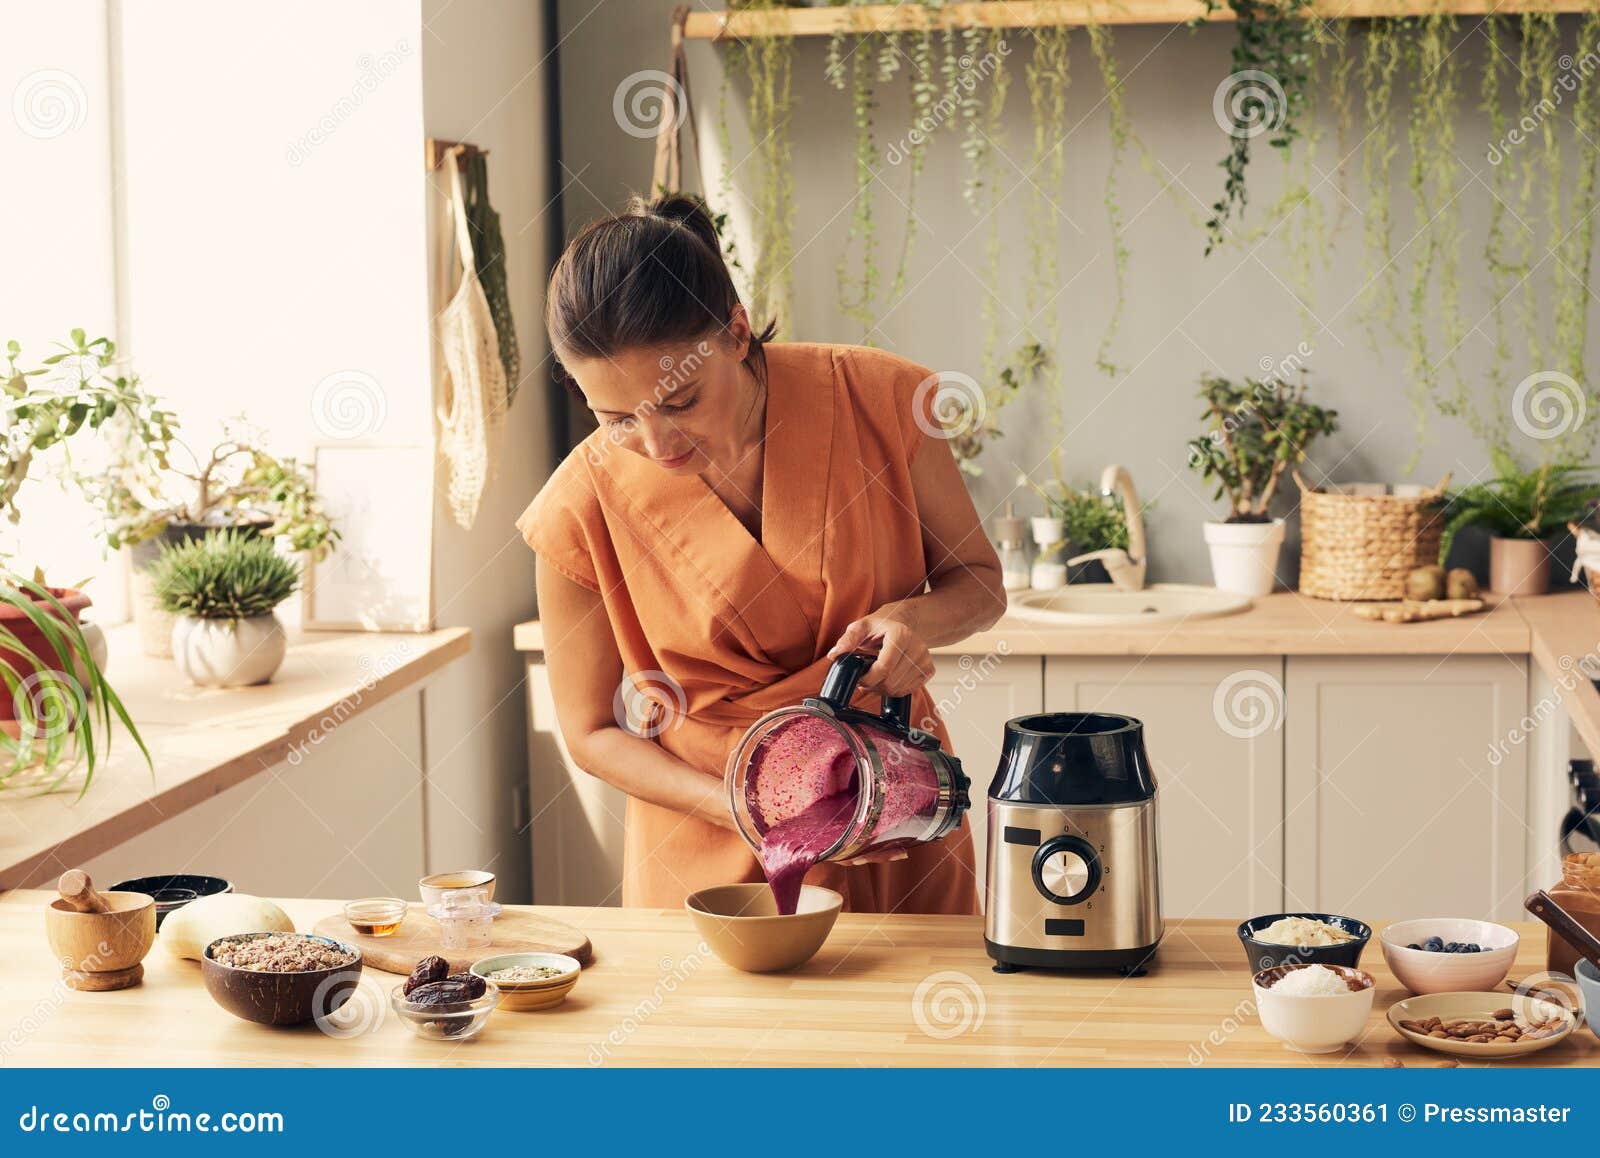 https://thumbs.dreamstime.com/z/young-brunette-woman-bending-over-kitchen-table-pouring-fresh-homemade-vegetable-smoothie-bowl-young-brunette-woman-233560361.jpg